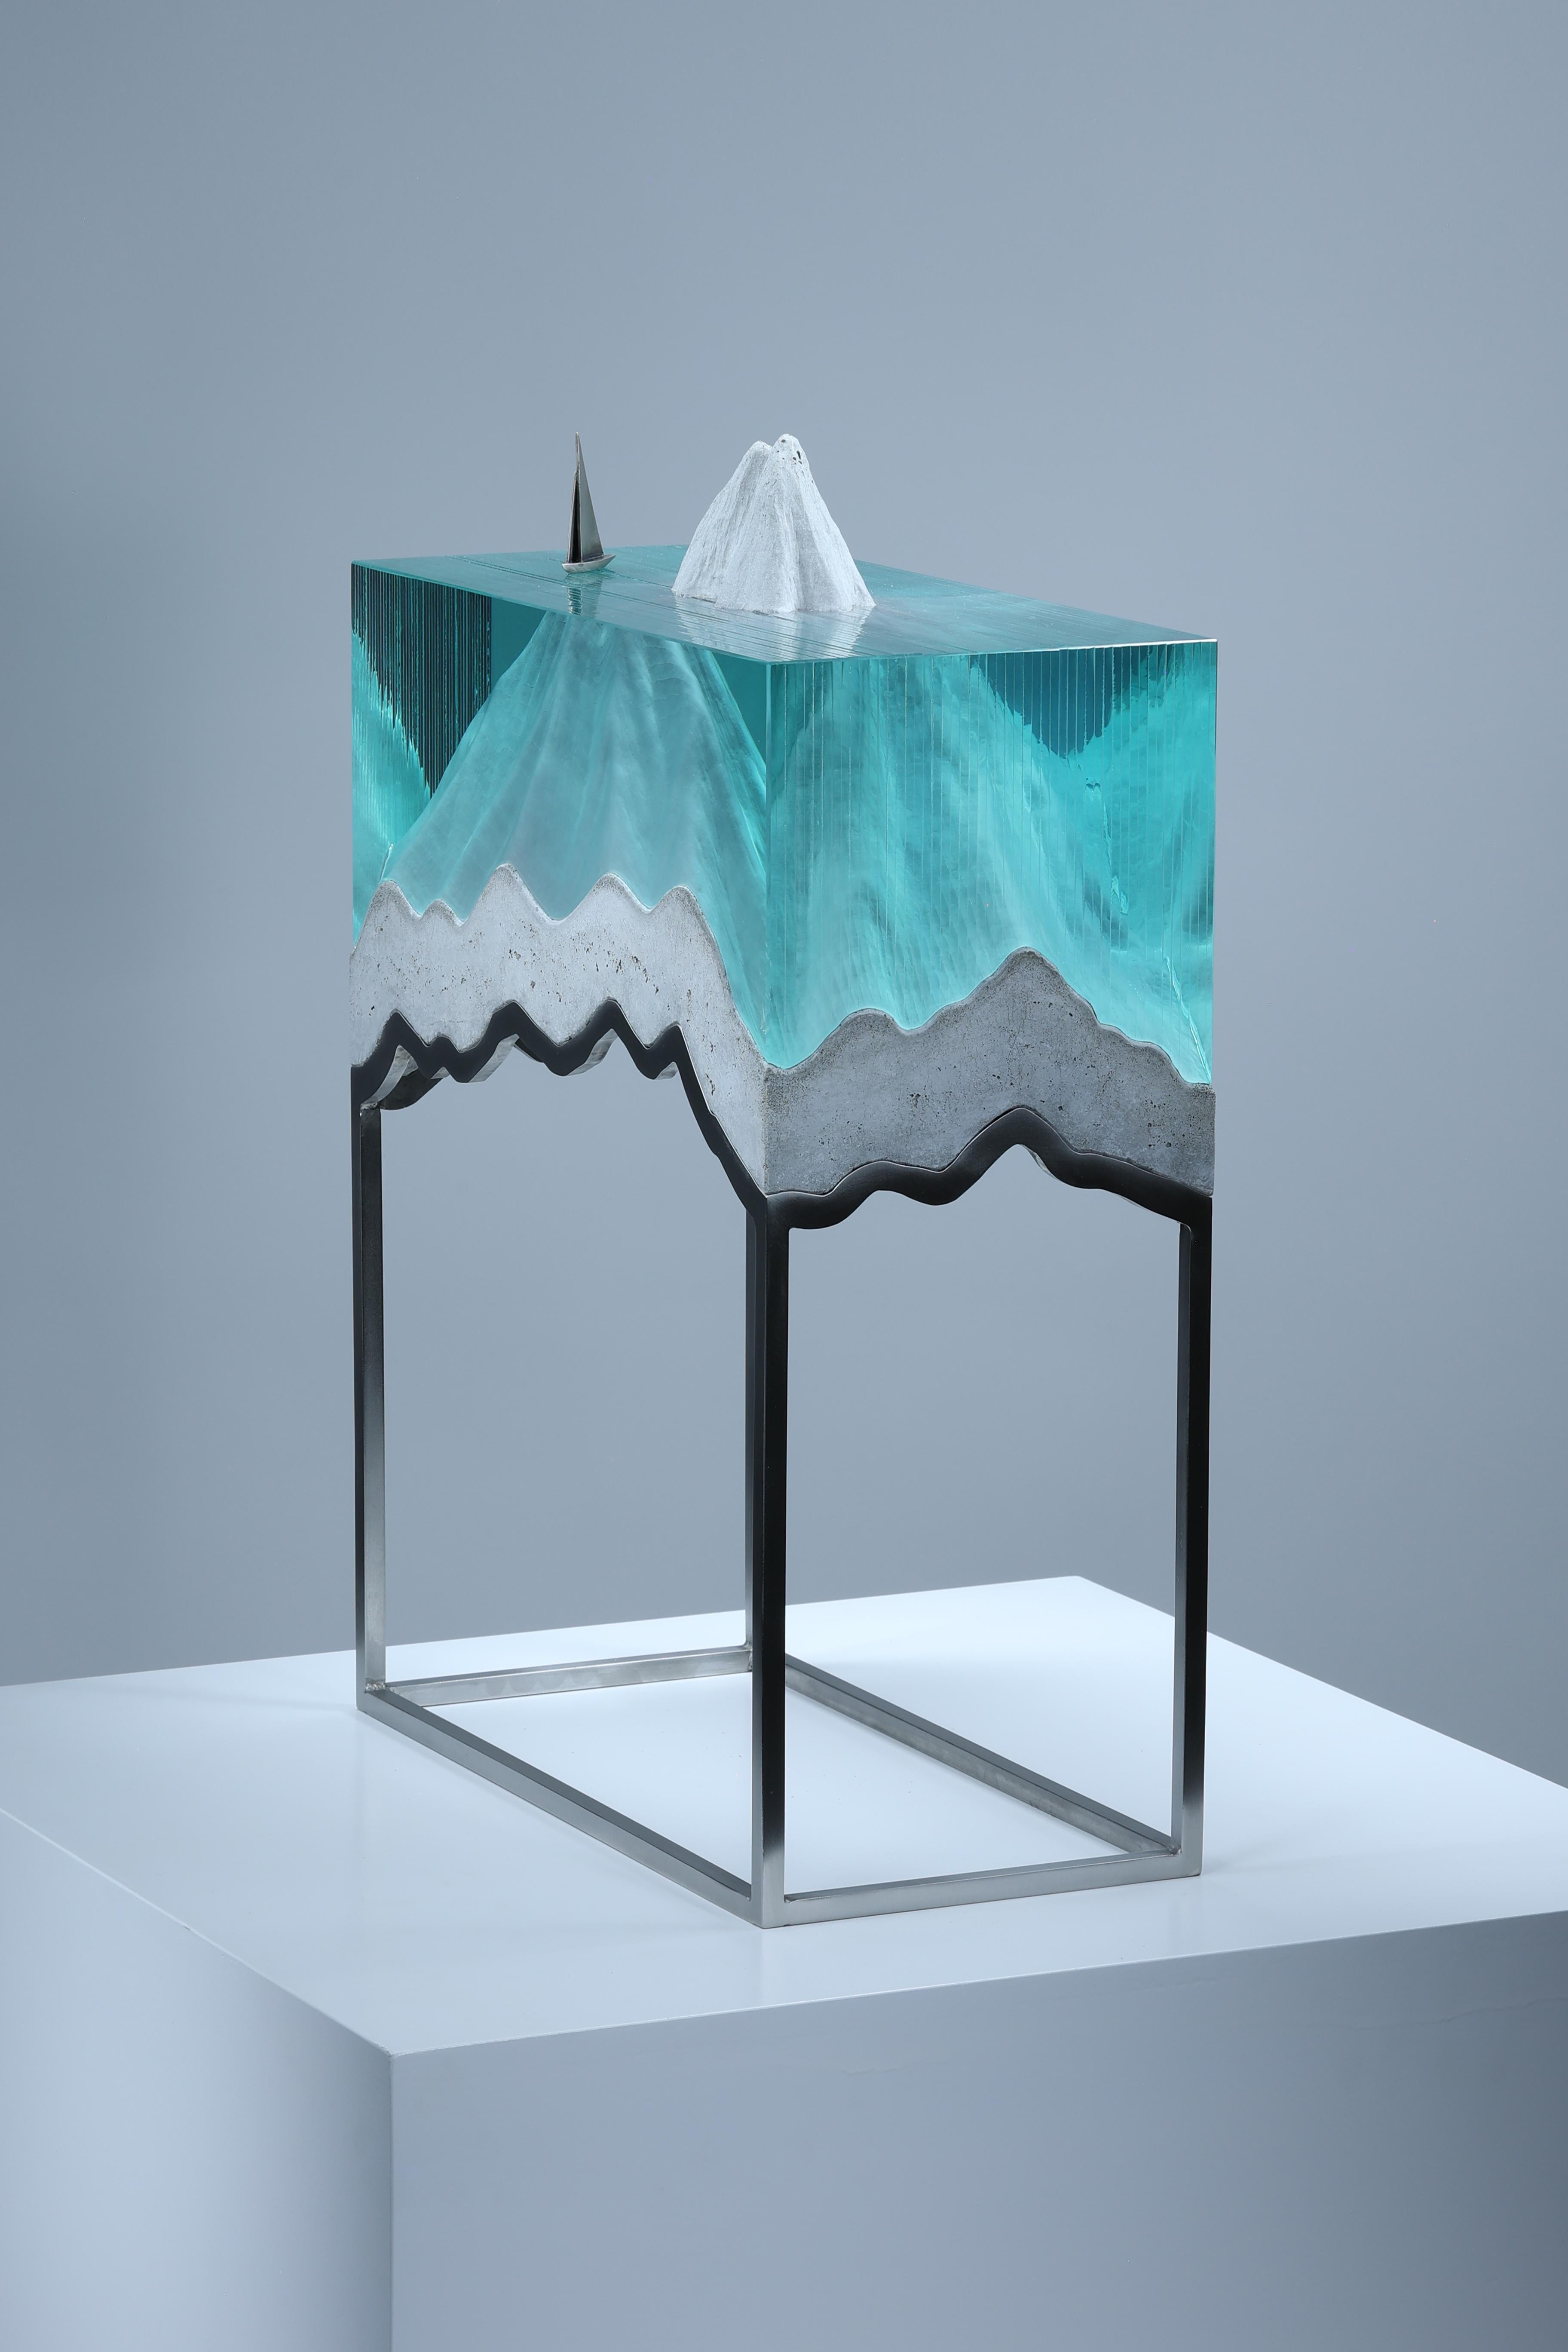 Ben Young’s sculpture fluidly blends glass, concrete, bronze, steel, and light to depict romantic and pensive imagery highlighting the fragility of our climate and its most precious resource – water. Born in Australia and raised in New Zealand,